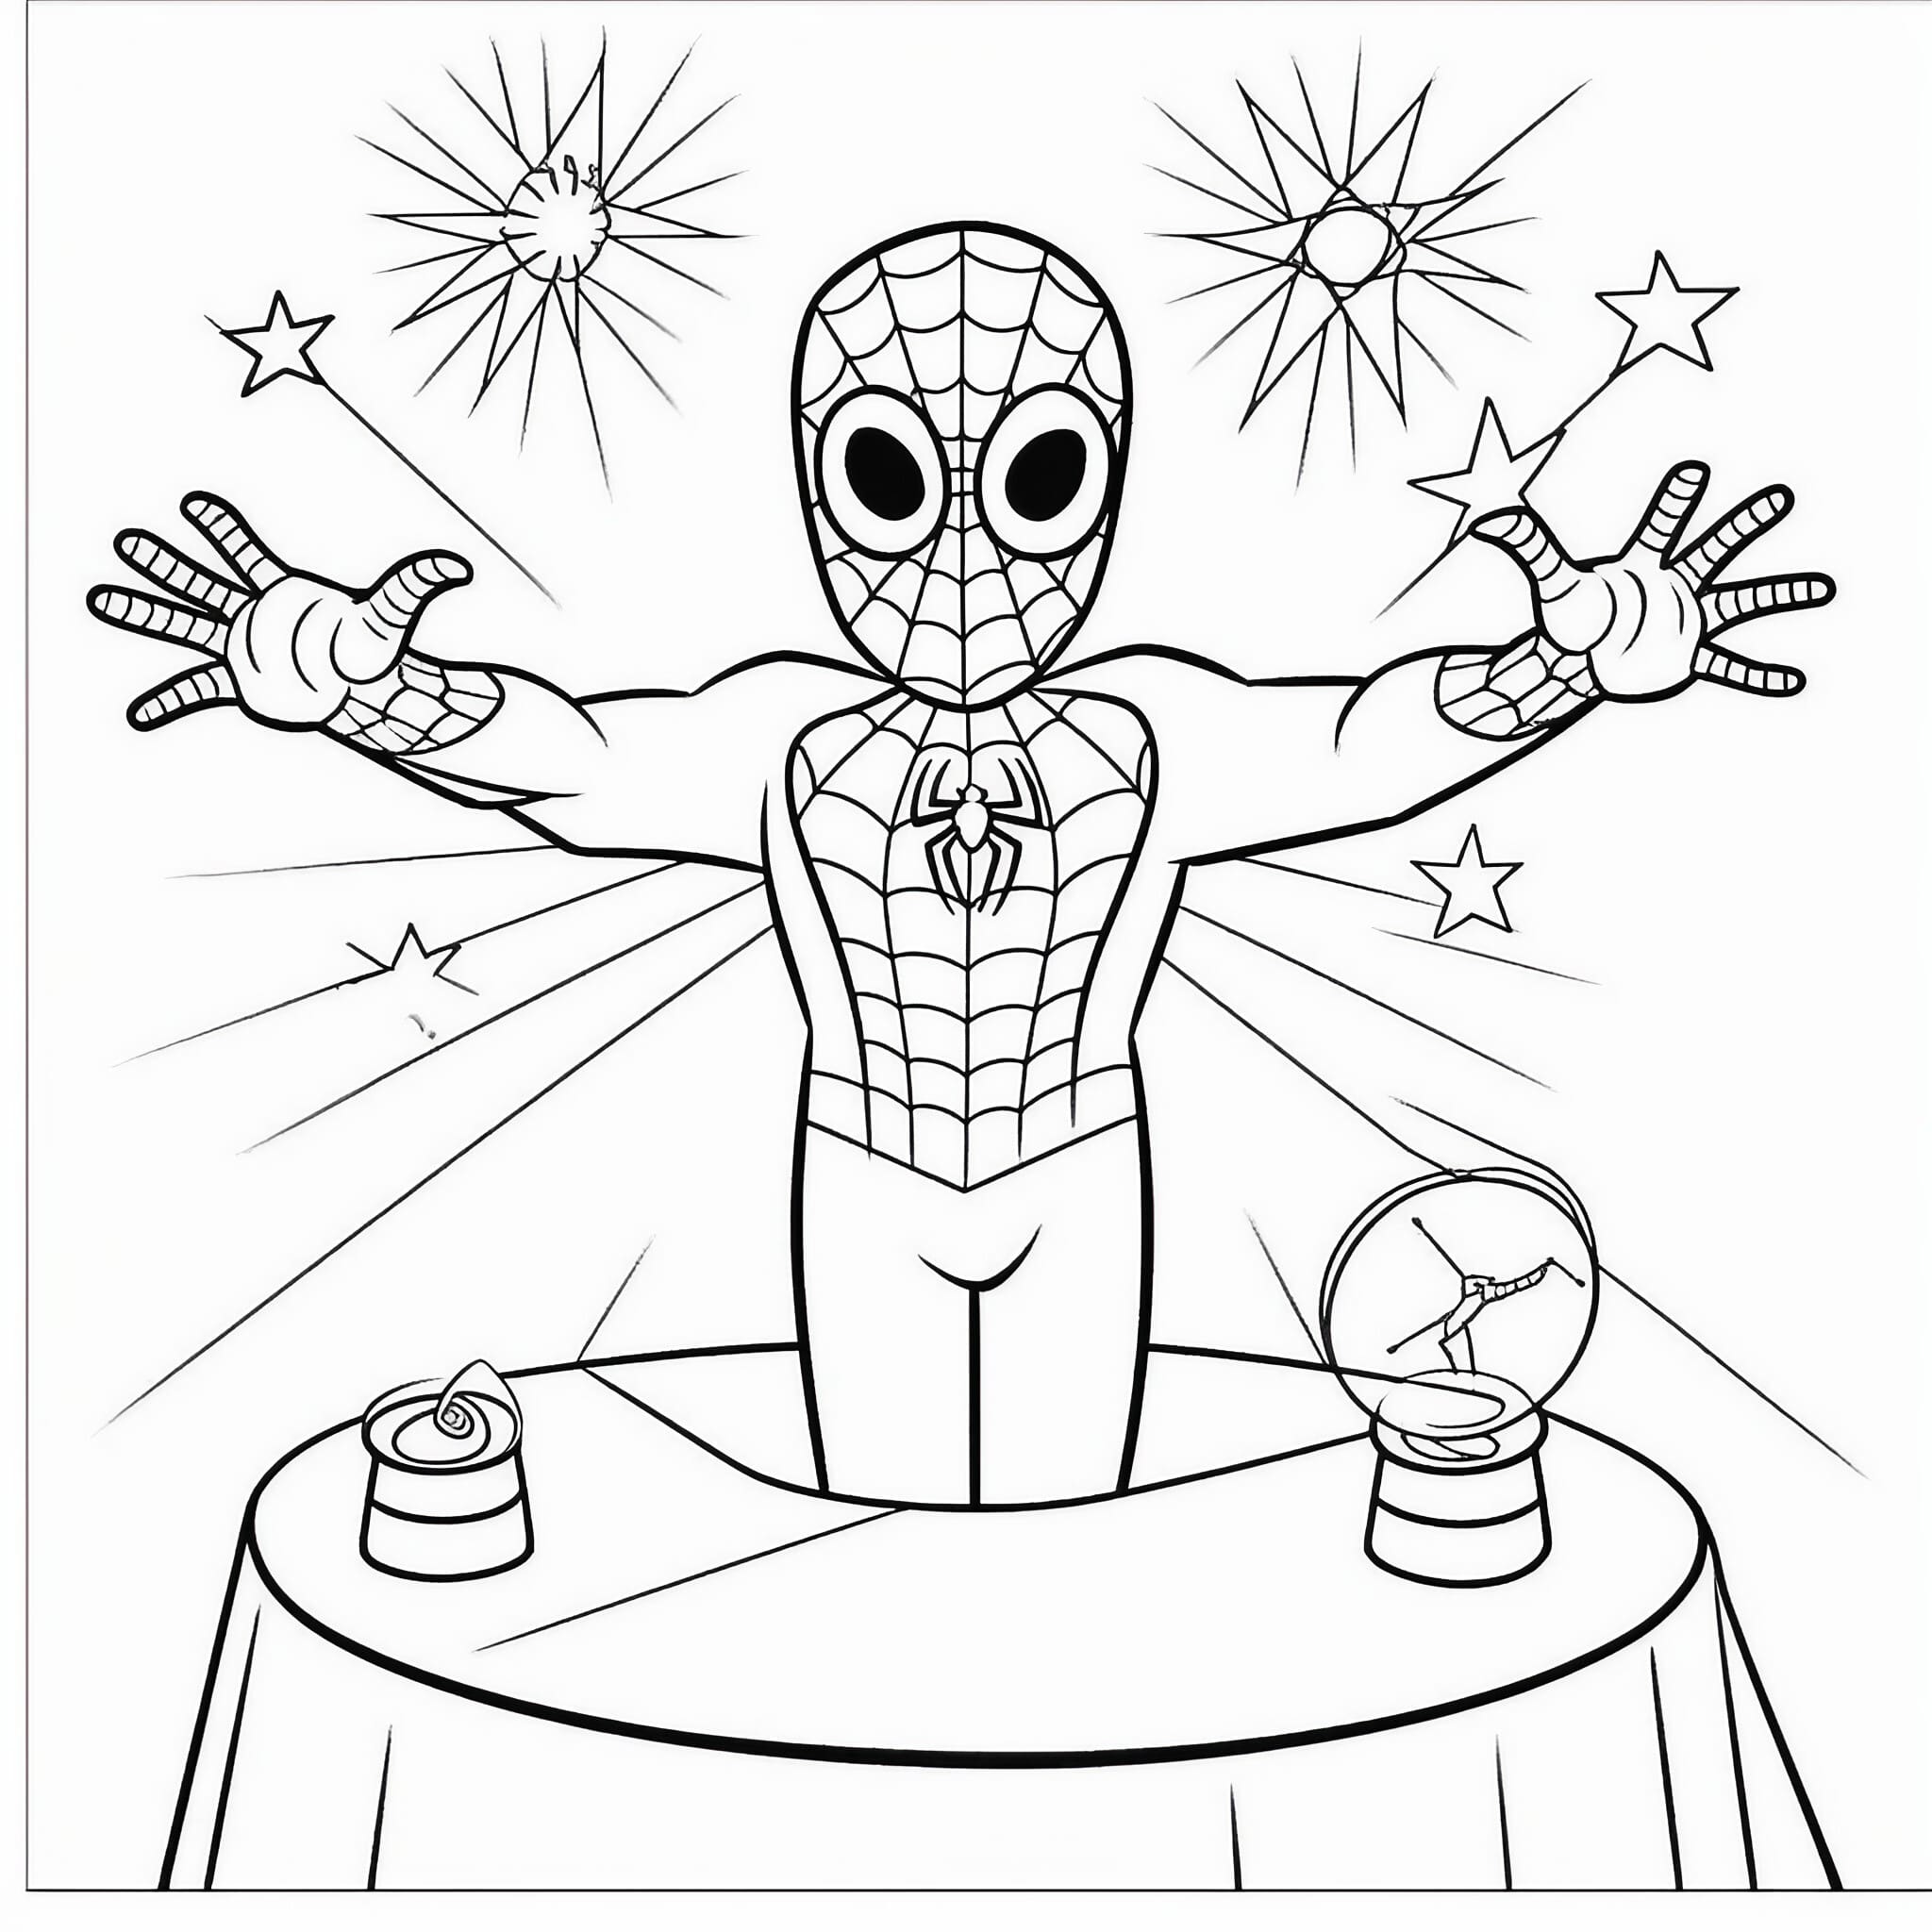 Spiderman coloring pages for free printable